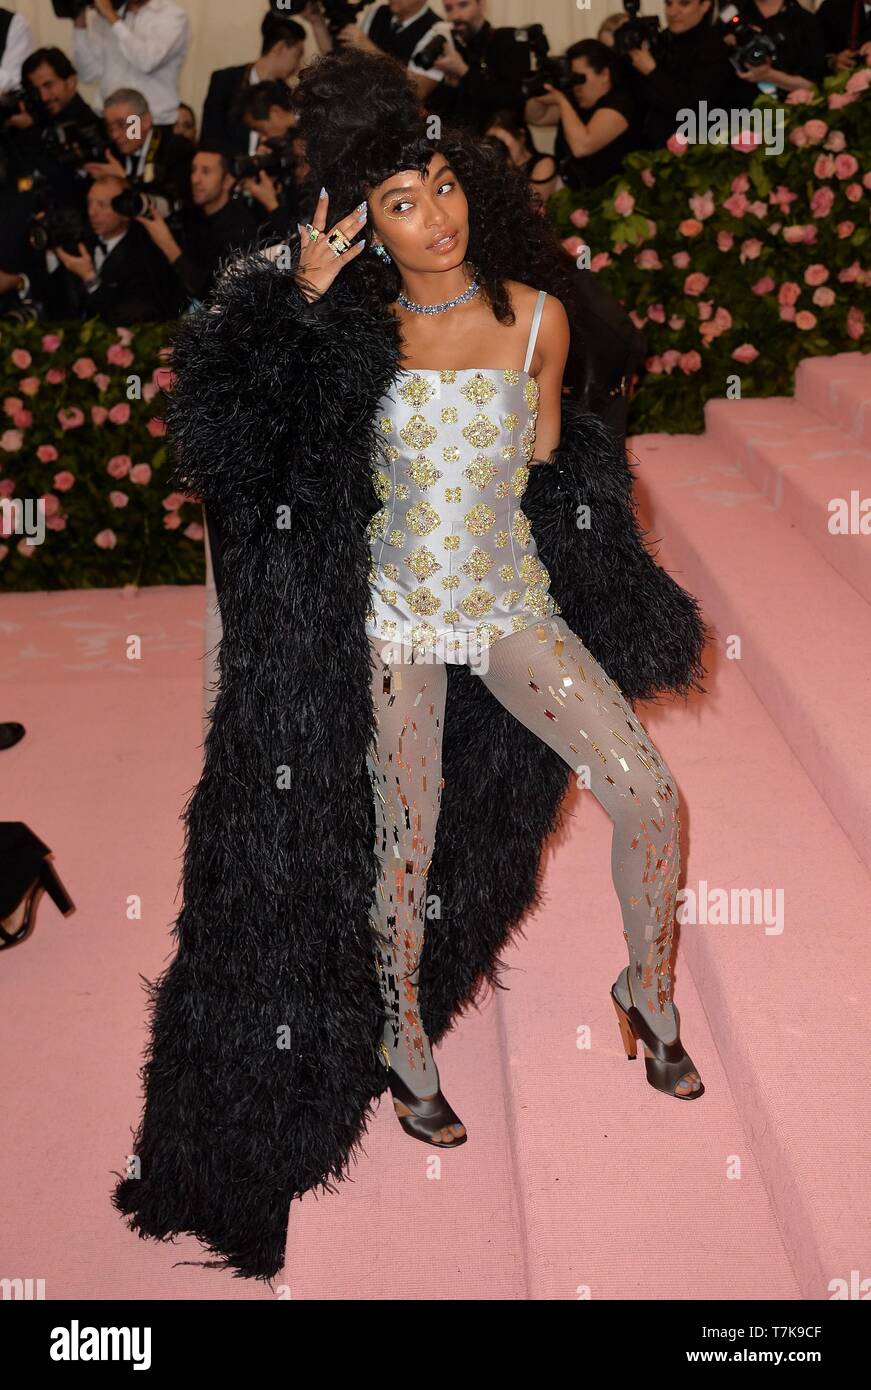 New York Ny Usa 6th May 2019 Yara Shahidi At Arrivals For Camp Notes On Fashion Met Gala Costume Institute Annual Benefit Part 5 Metropolitan Museum Of Art New York Ny